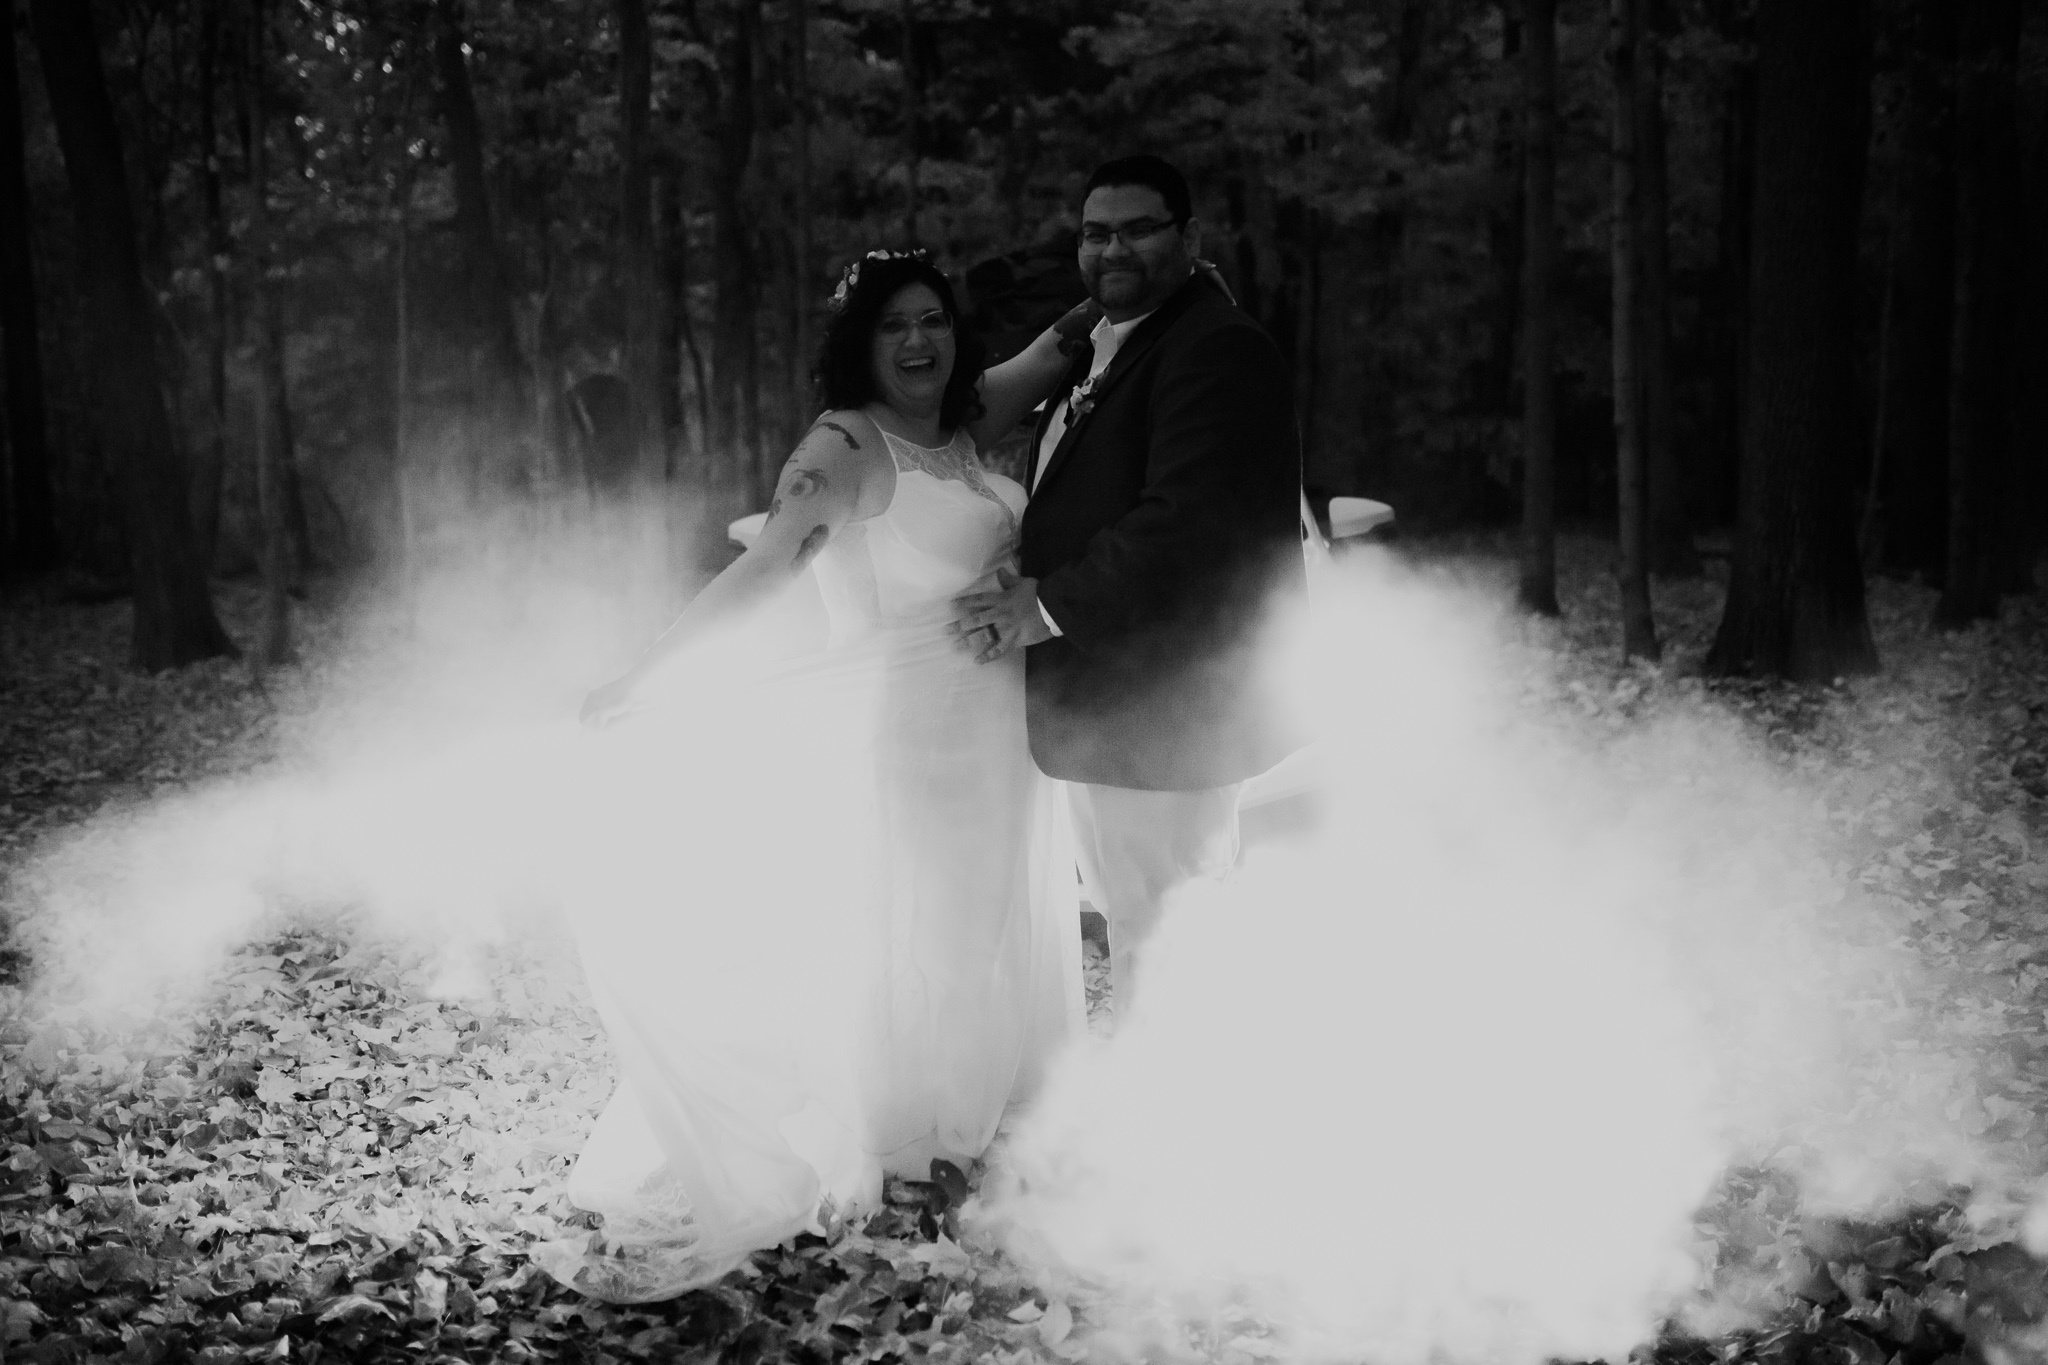 Bride and groom snuggle by a campfire during their fall elopement at Turkey Run State Park